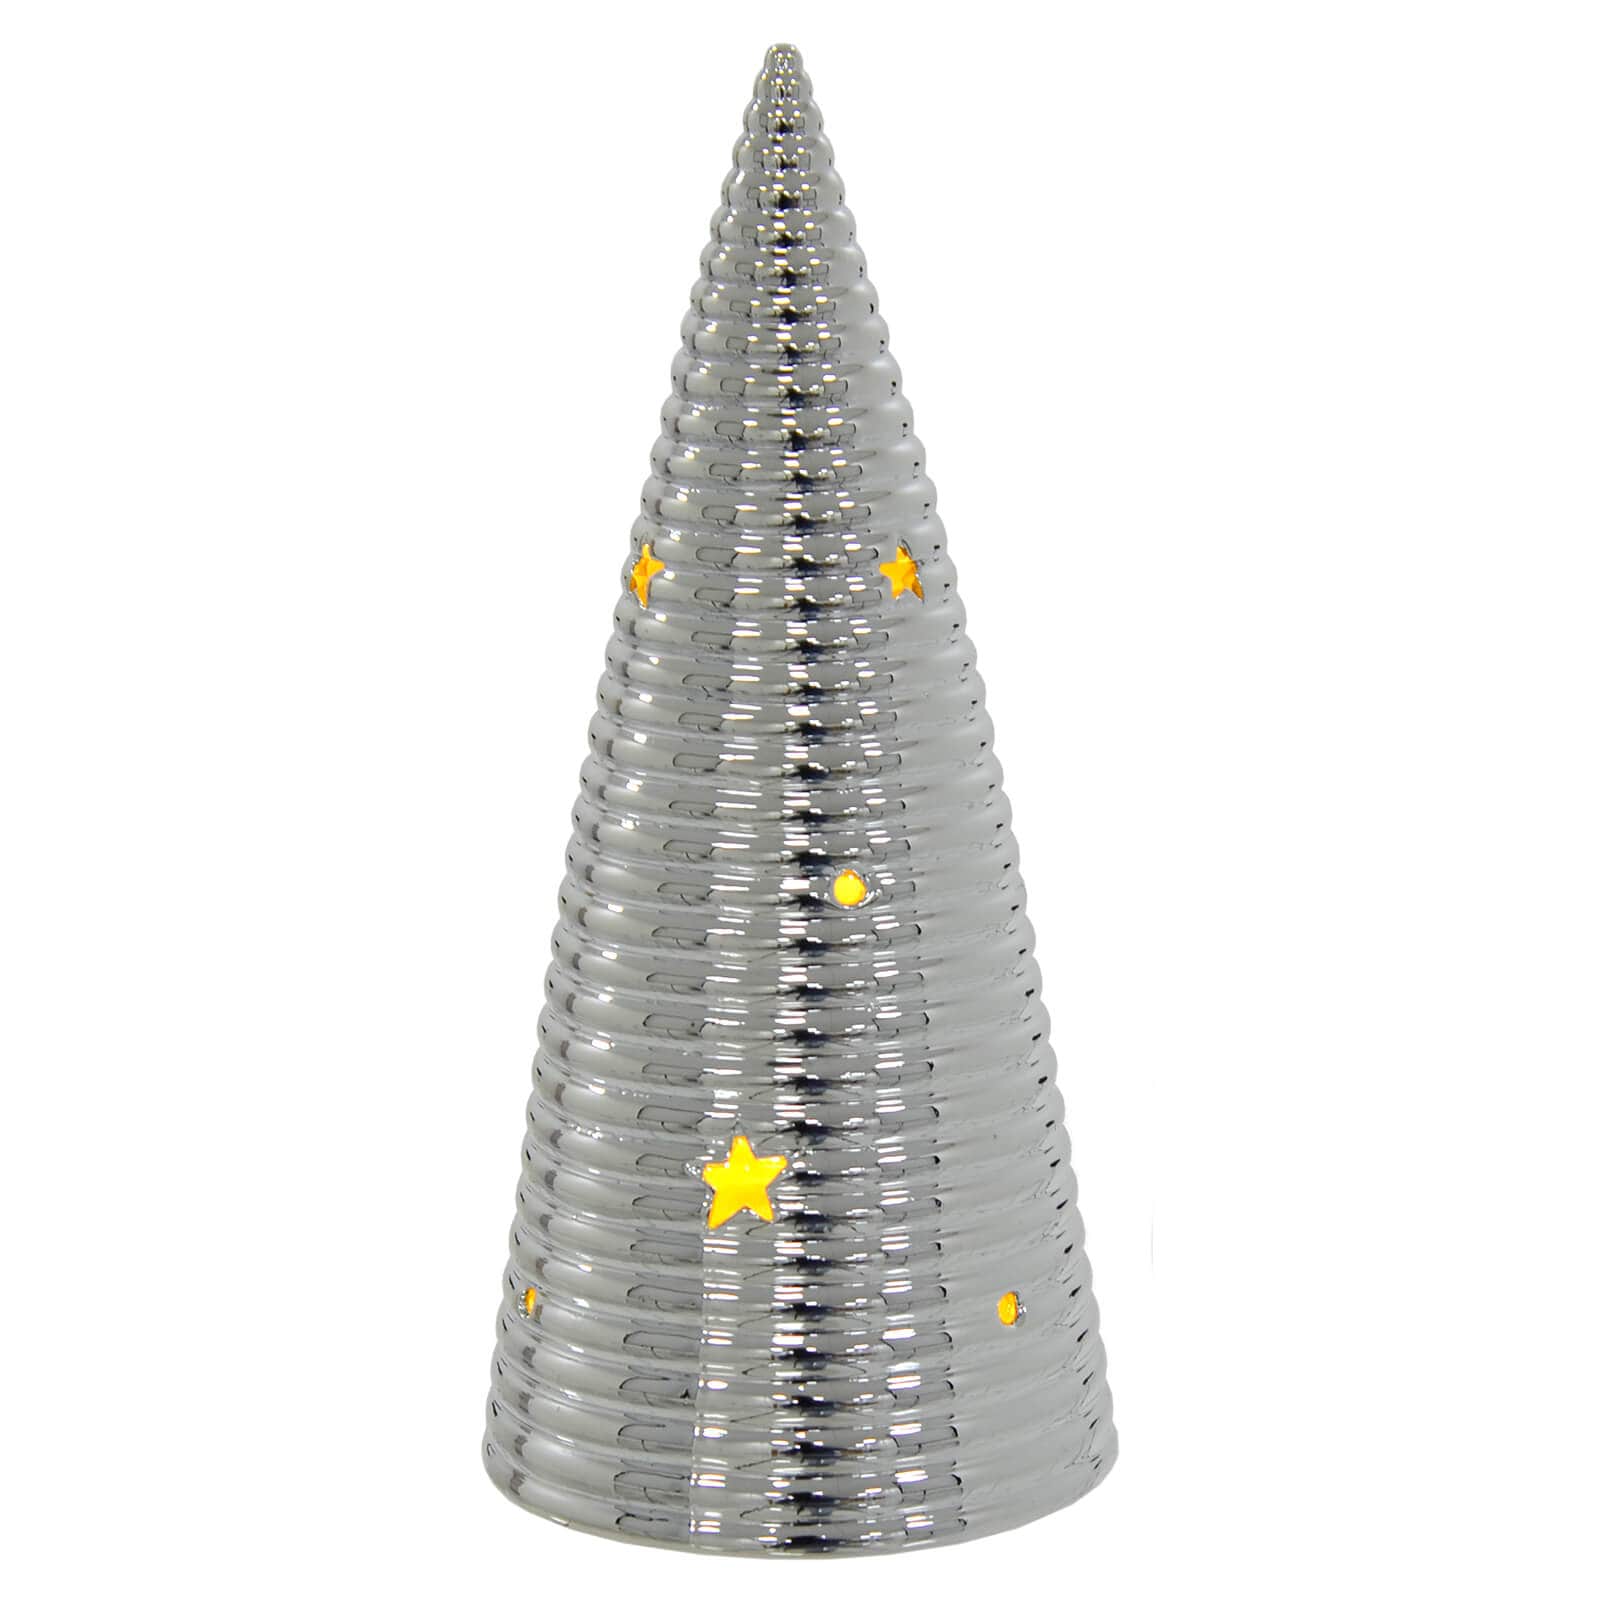 Modern cone shaped light up Christmas tree ornament in silver with warm white LED light shining through cut away stars and circles